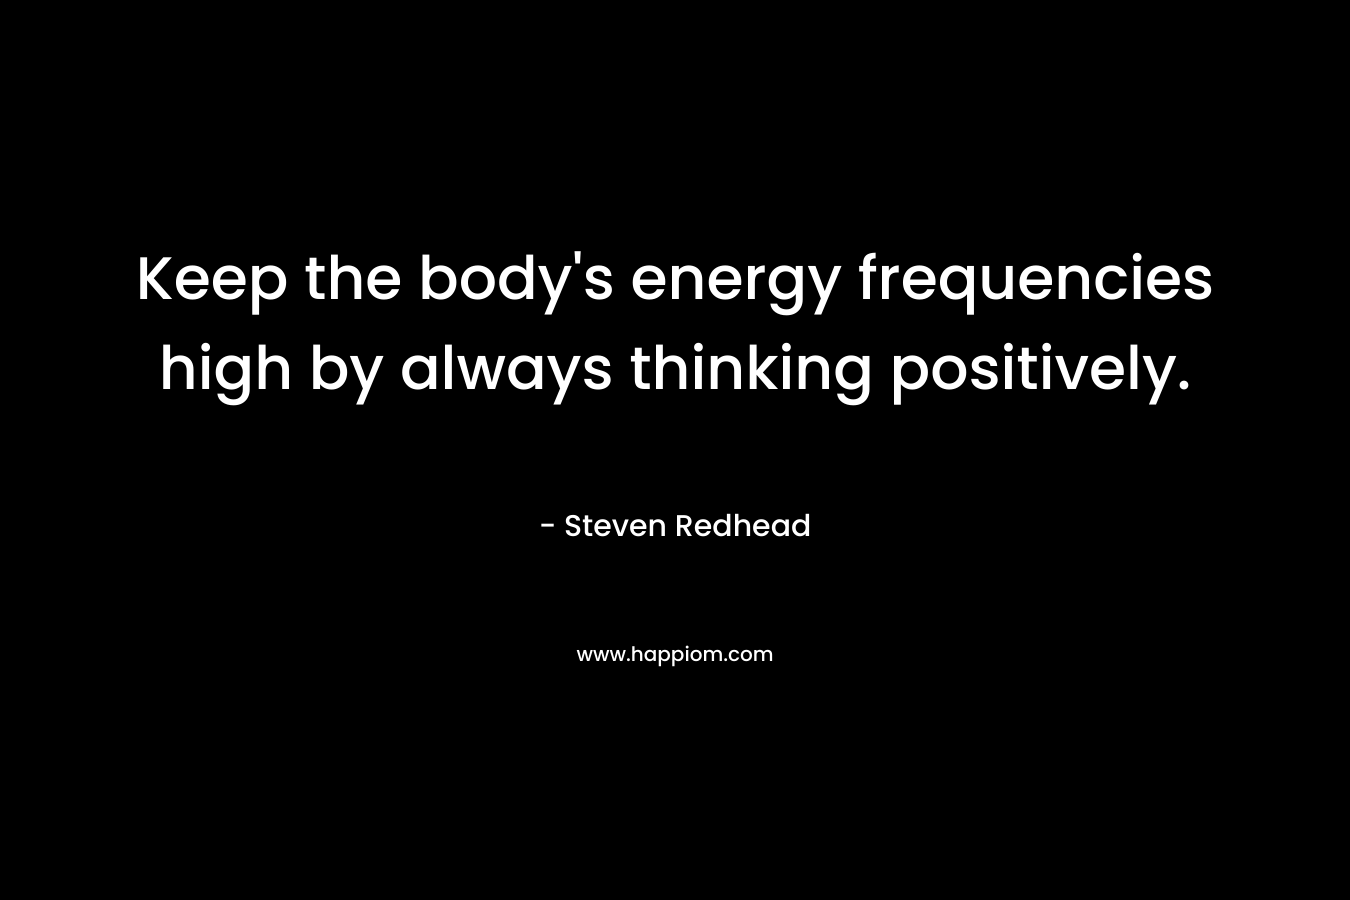 Keep the body's energy frequencies high by always thinking positively.